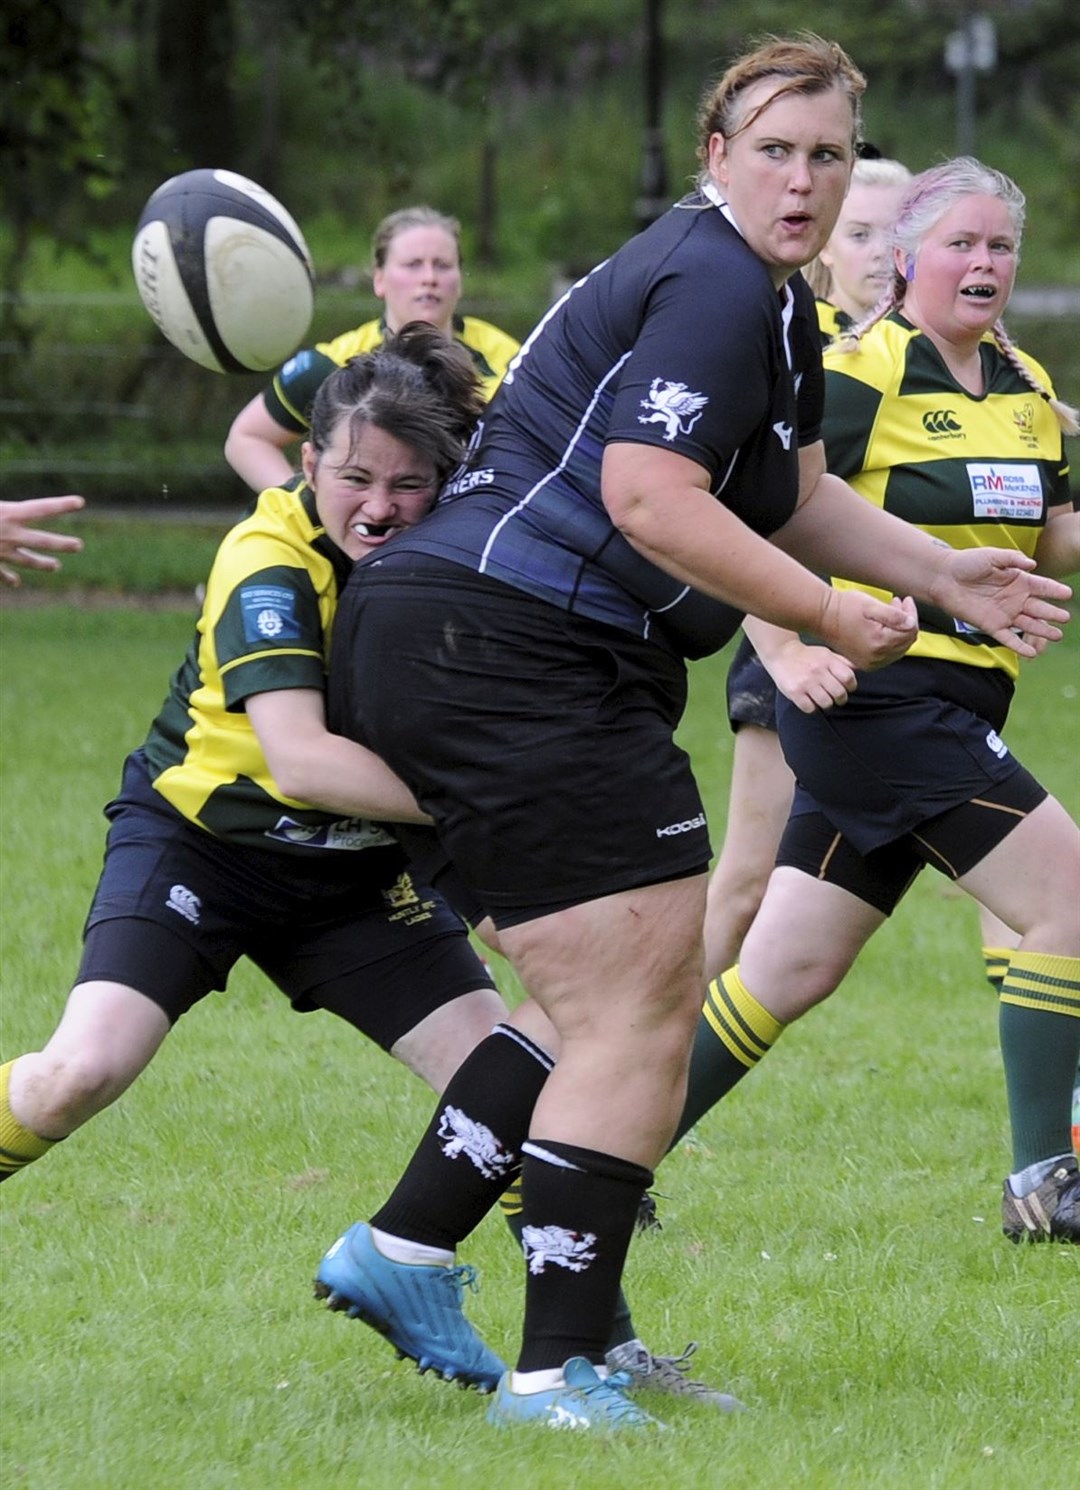 Eric Cormack's winning entry in the top shot of the year award at the Highlands and Islands Press Awards came from a women's rugby match in Huntly.